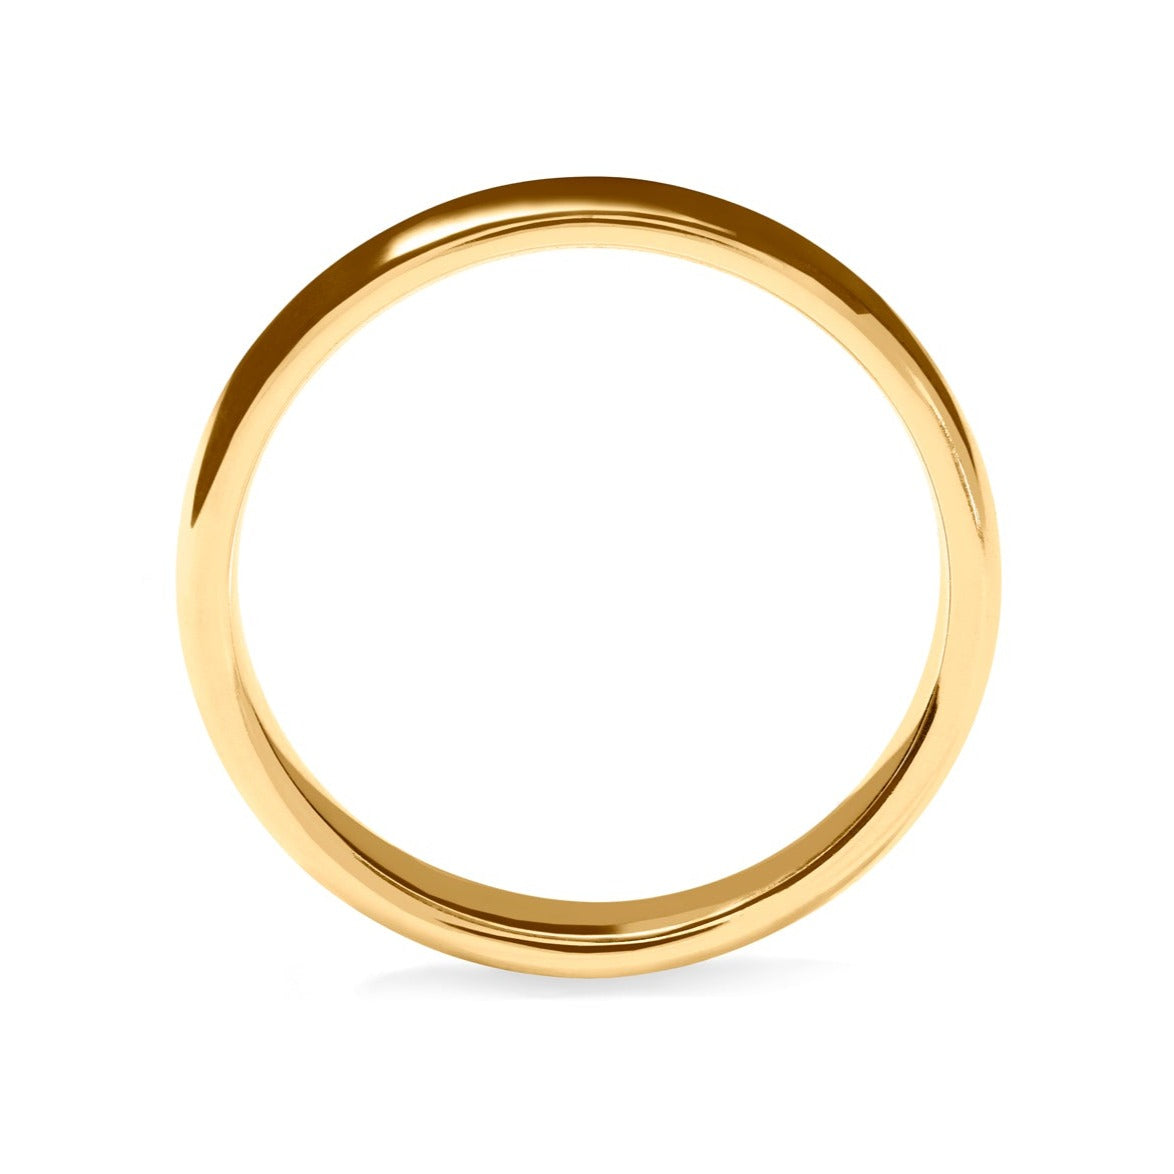 The Pure 1.5mm yellow gold